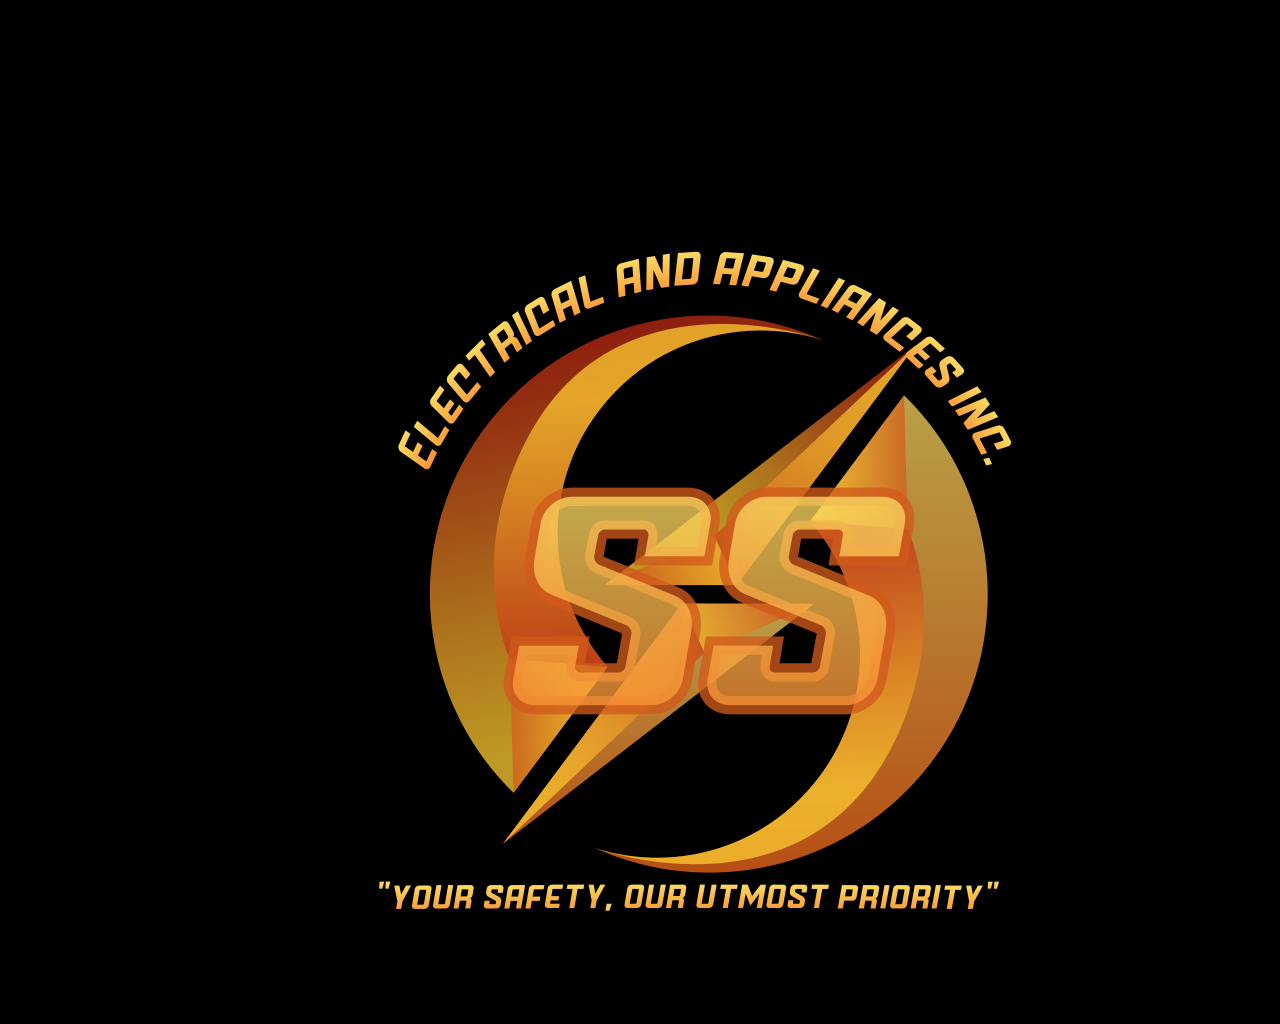 SS Electrical and Appliances Inc.'s logo